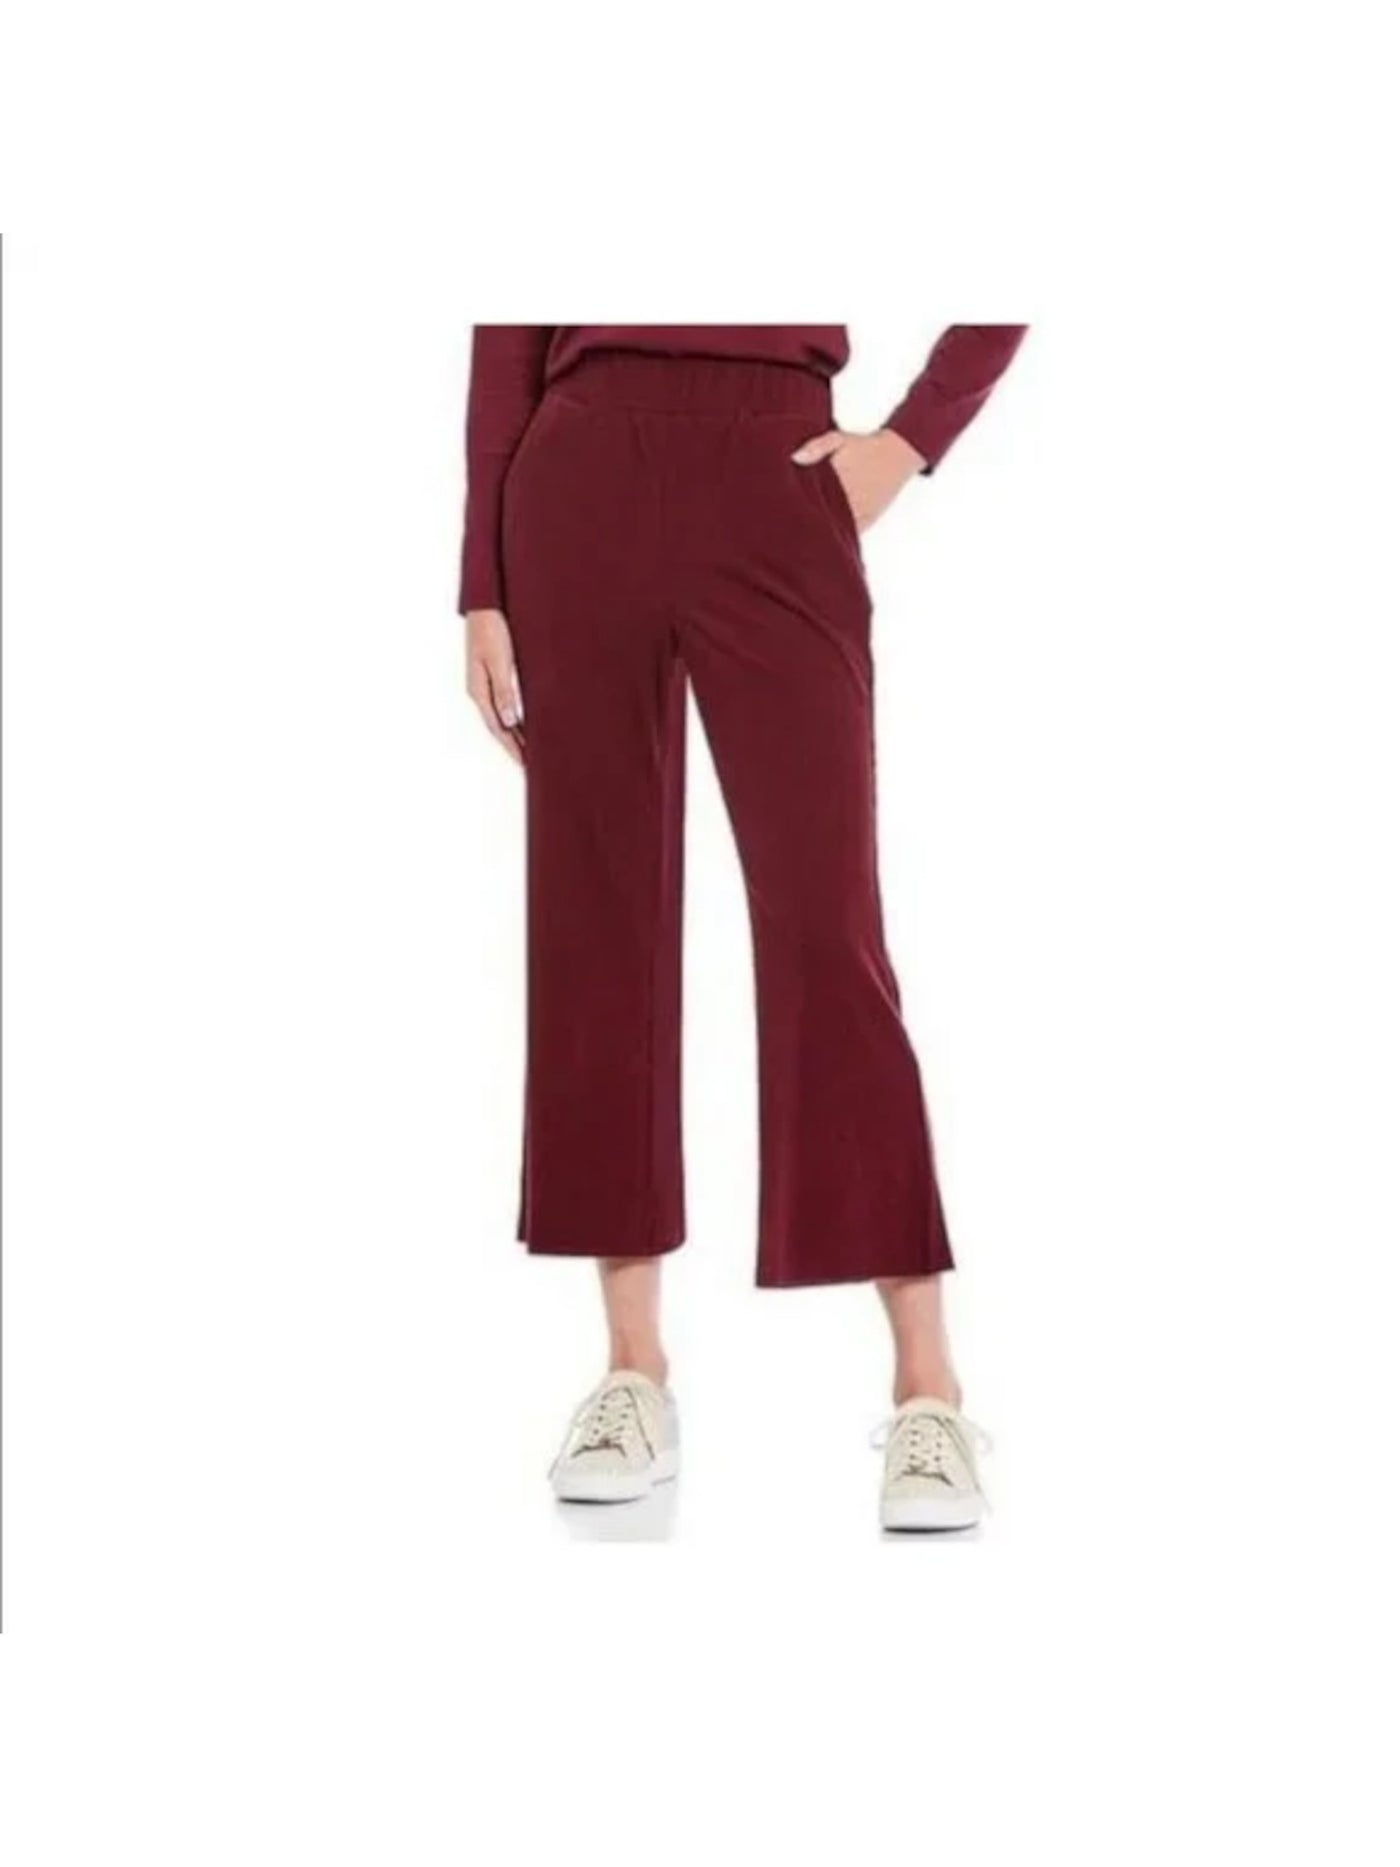 MICHAEL KORS Womens Burgundy Ribbed Pocketed Pull-on Kick-flare Cropped Pants Petites PS